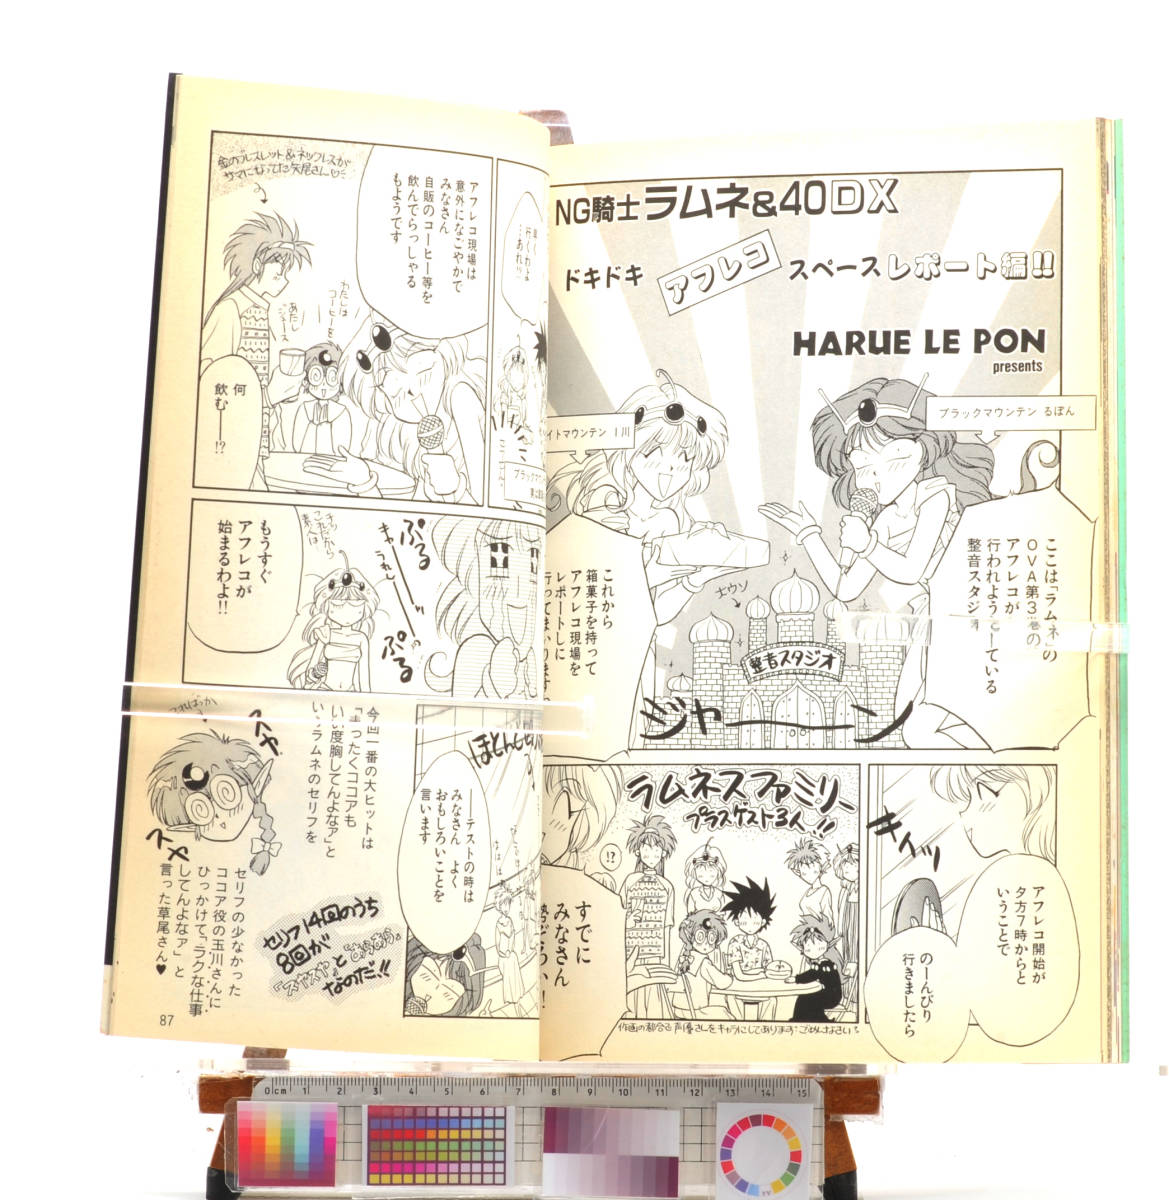 [Delivery Free]1993 Anime MOOK(A4) NG KNIGHT LAMNE&40DX NG騎士ラムネ＆40DX[tagMOOK]_画像8